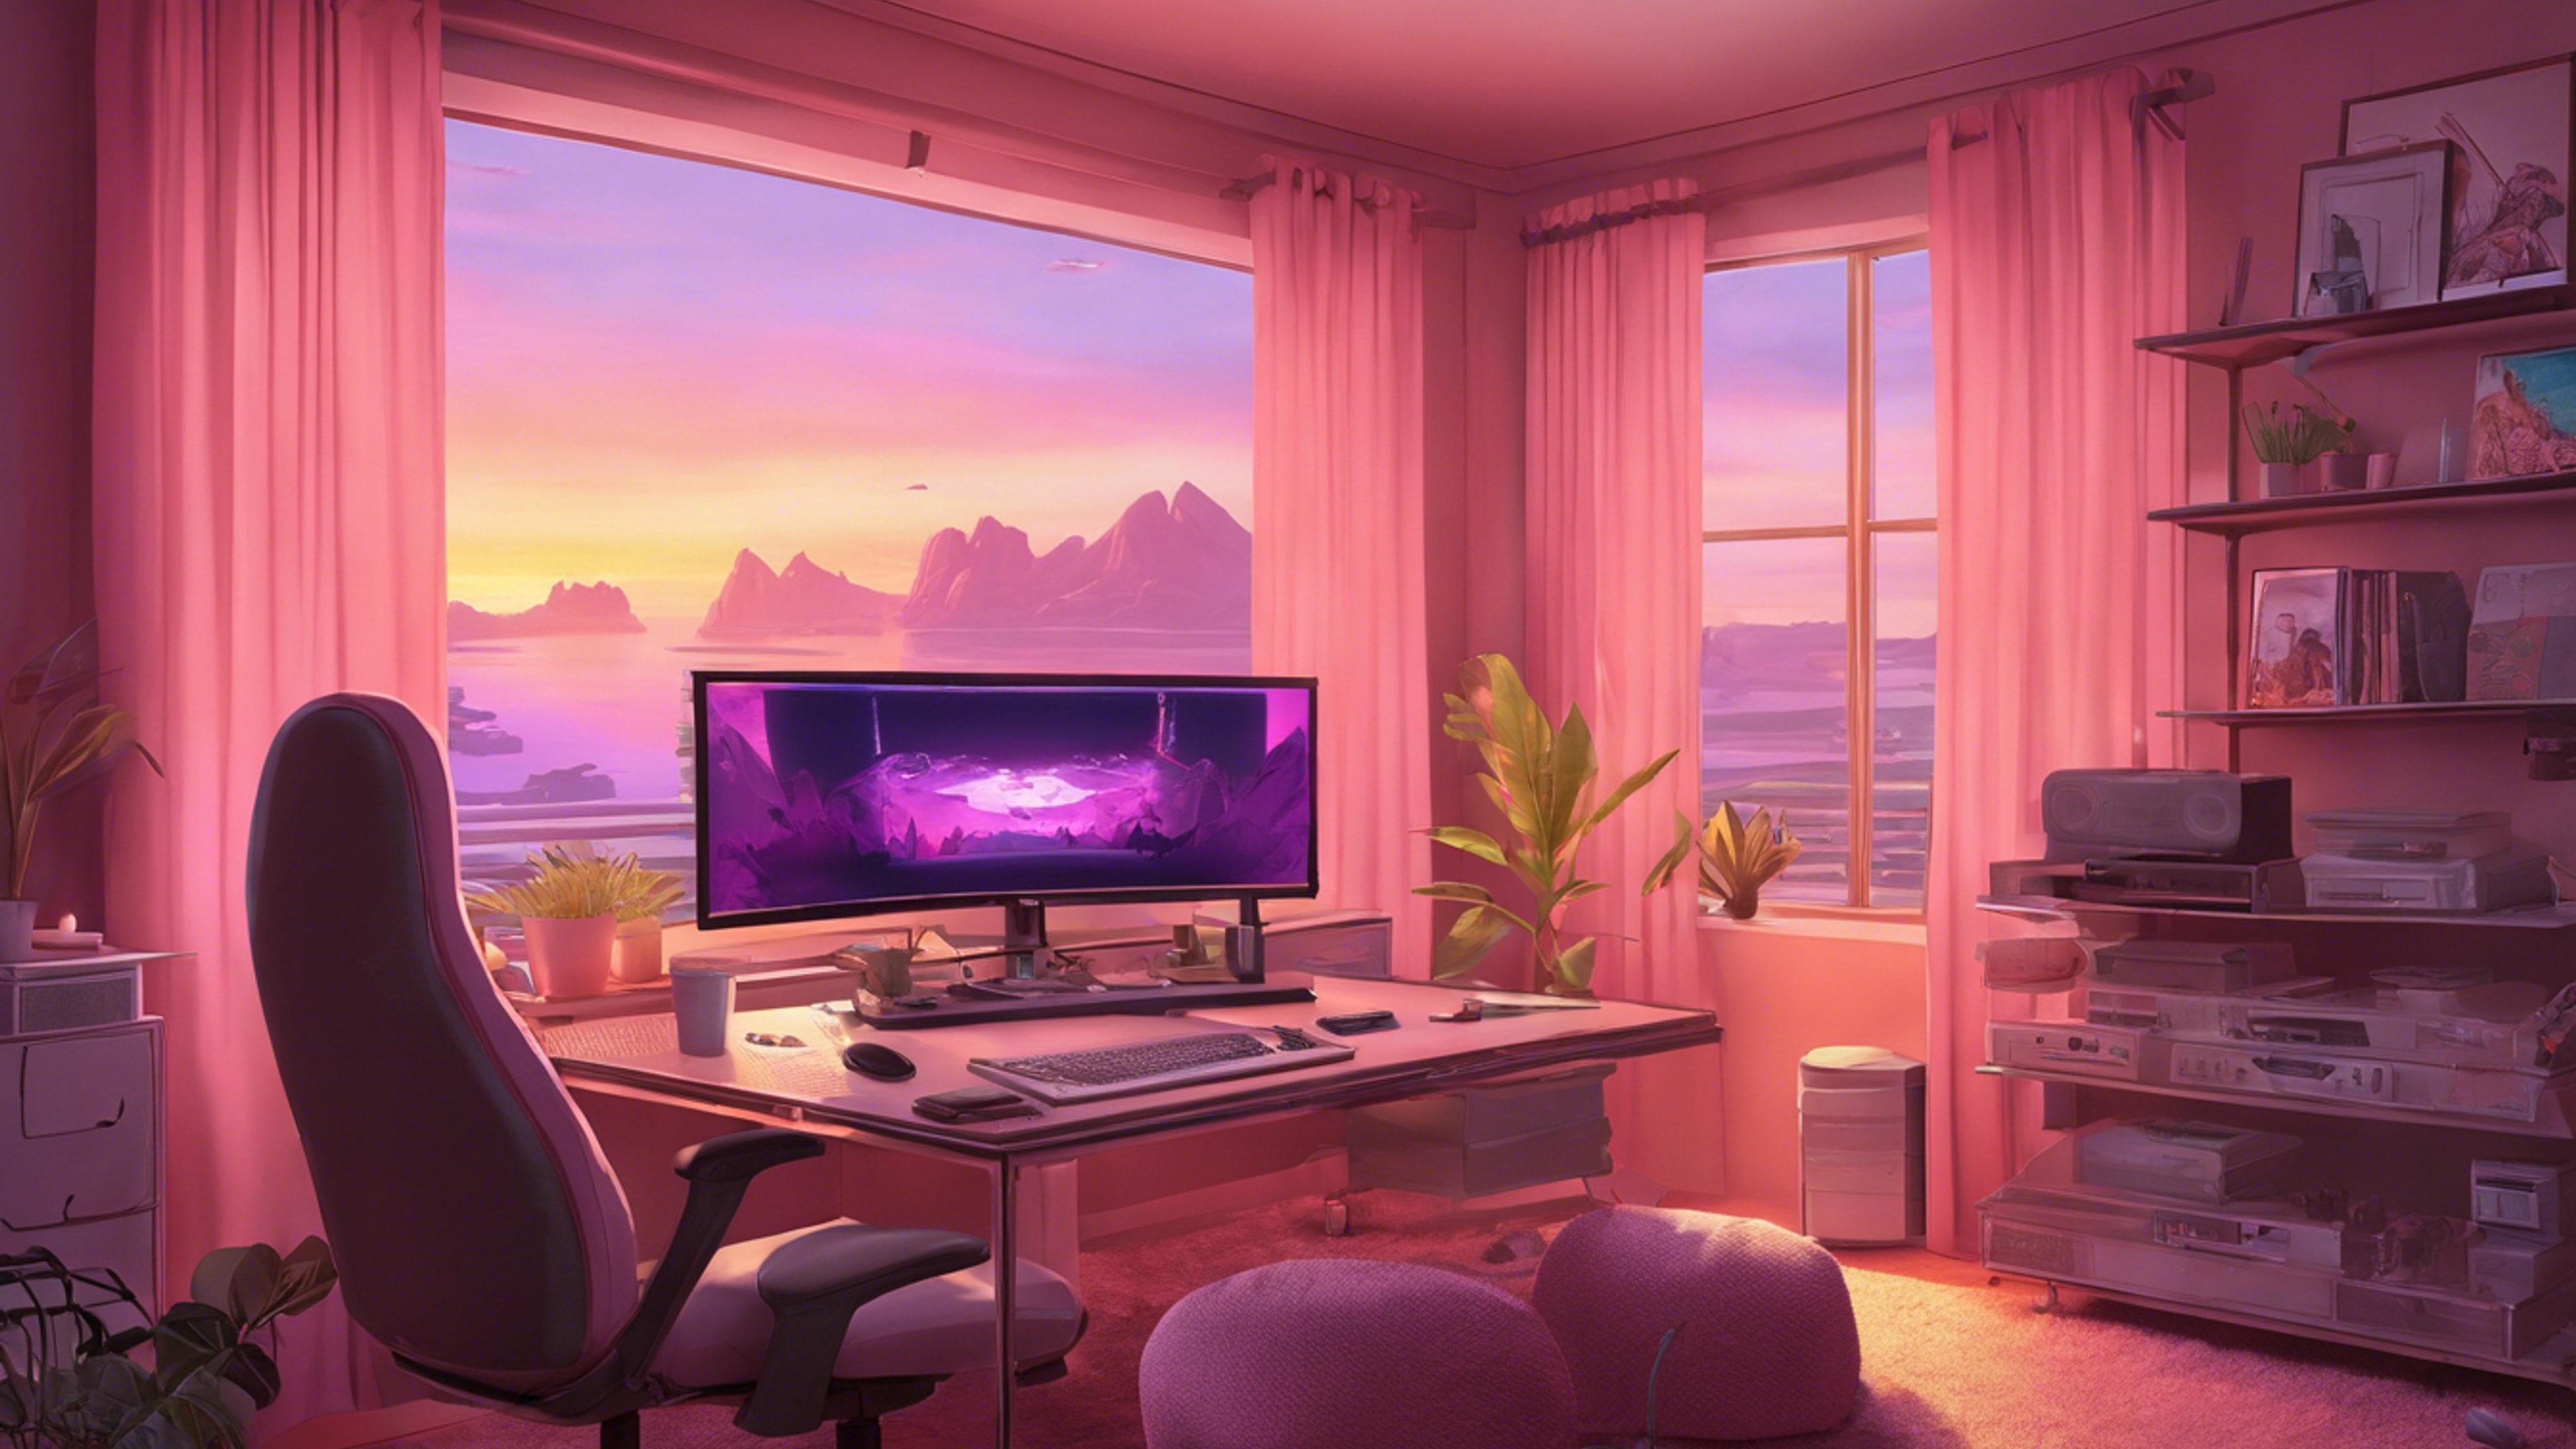 A beautiful shot of a gaming room at dusk with pastel pink curtains slightly drawn, allowing soft sunset hues to blend with the gaming setup's ambient light. Kertas dinding[98f2c4ff56214265aa5c]